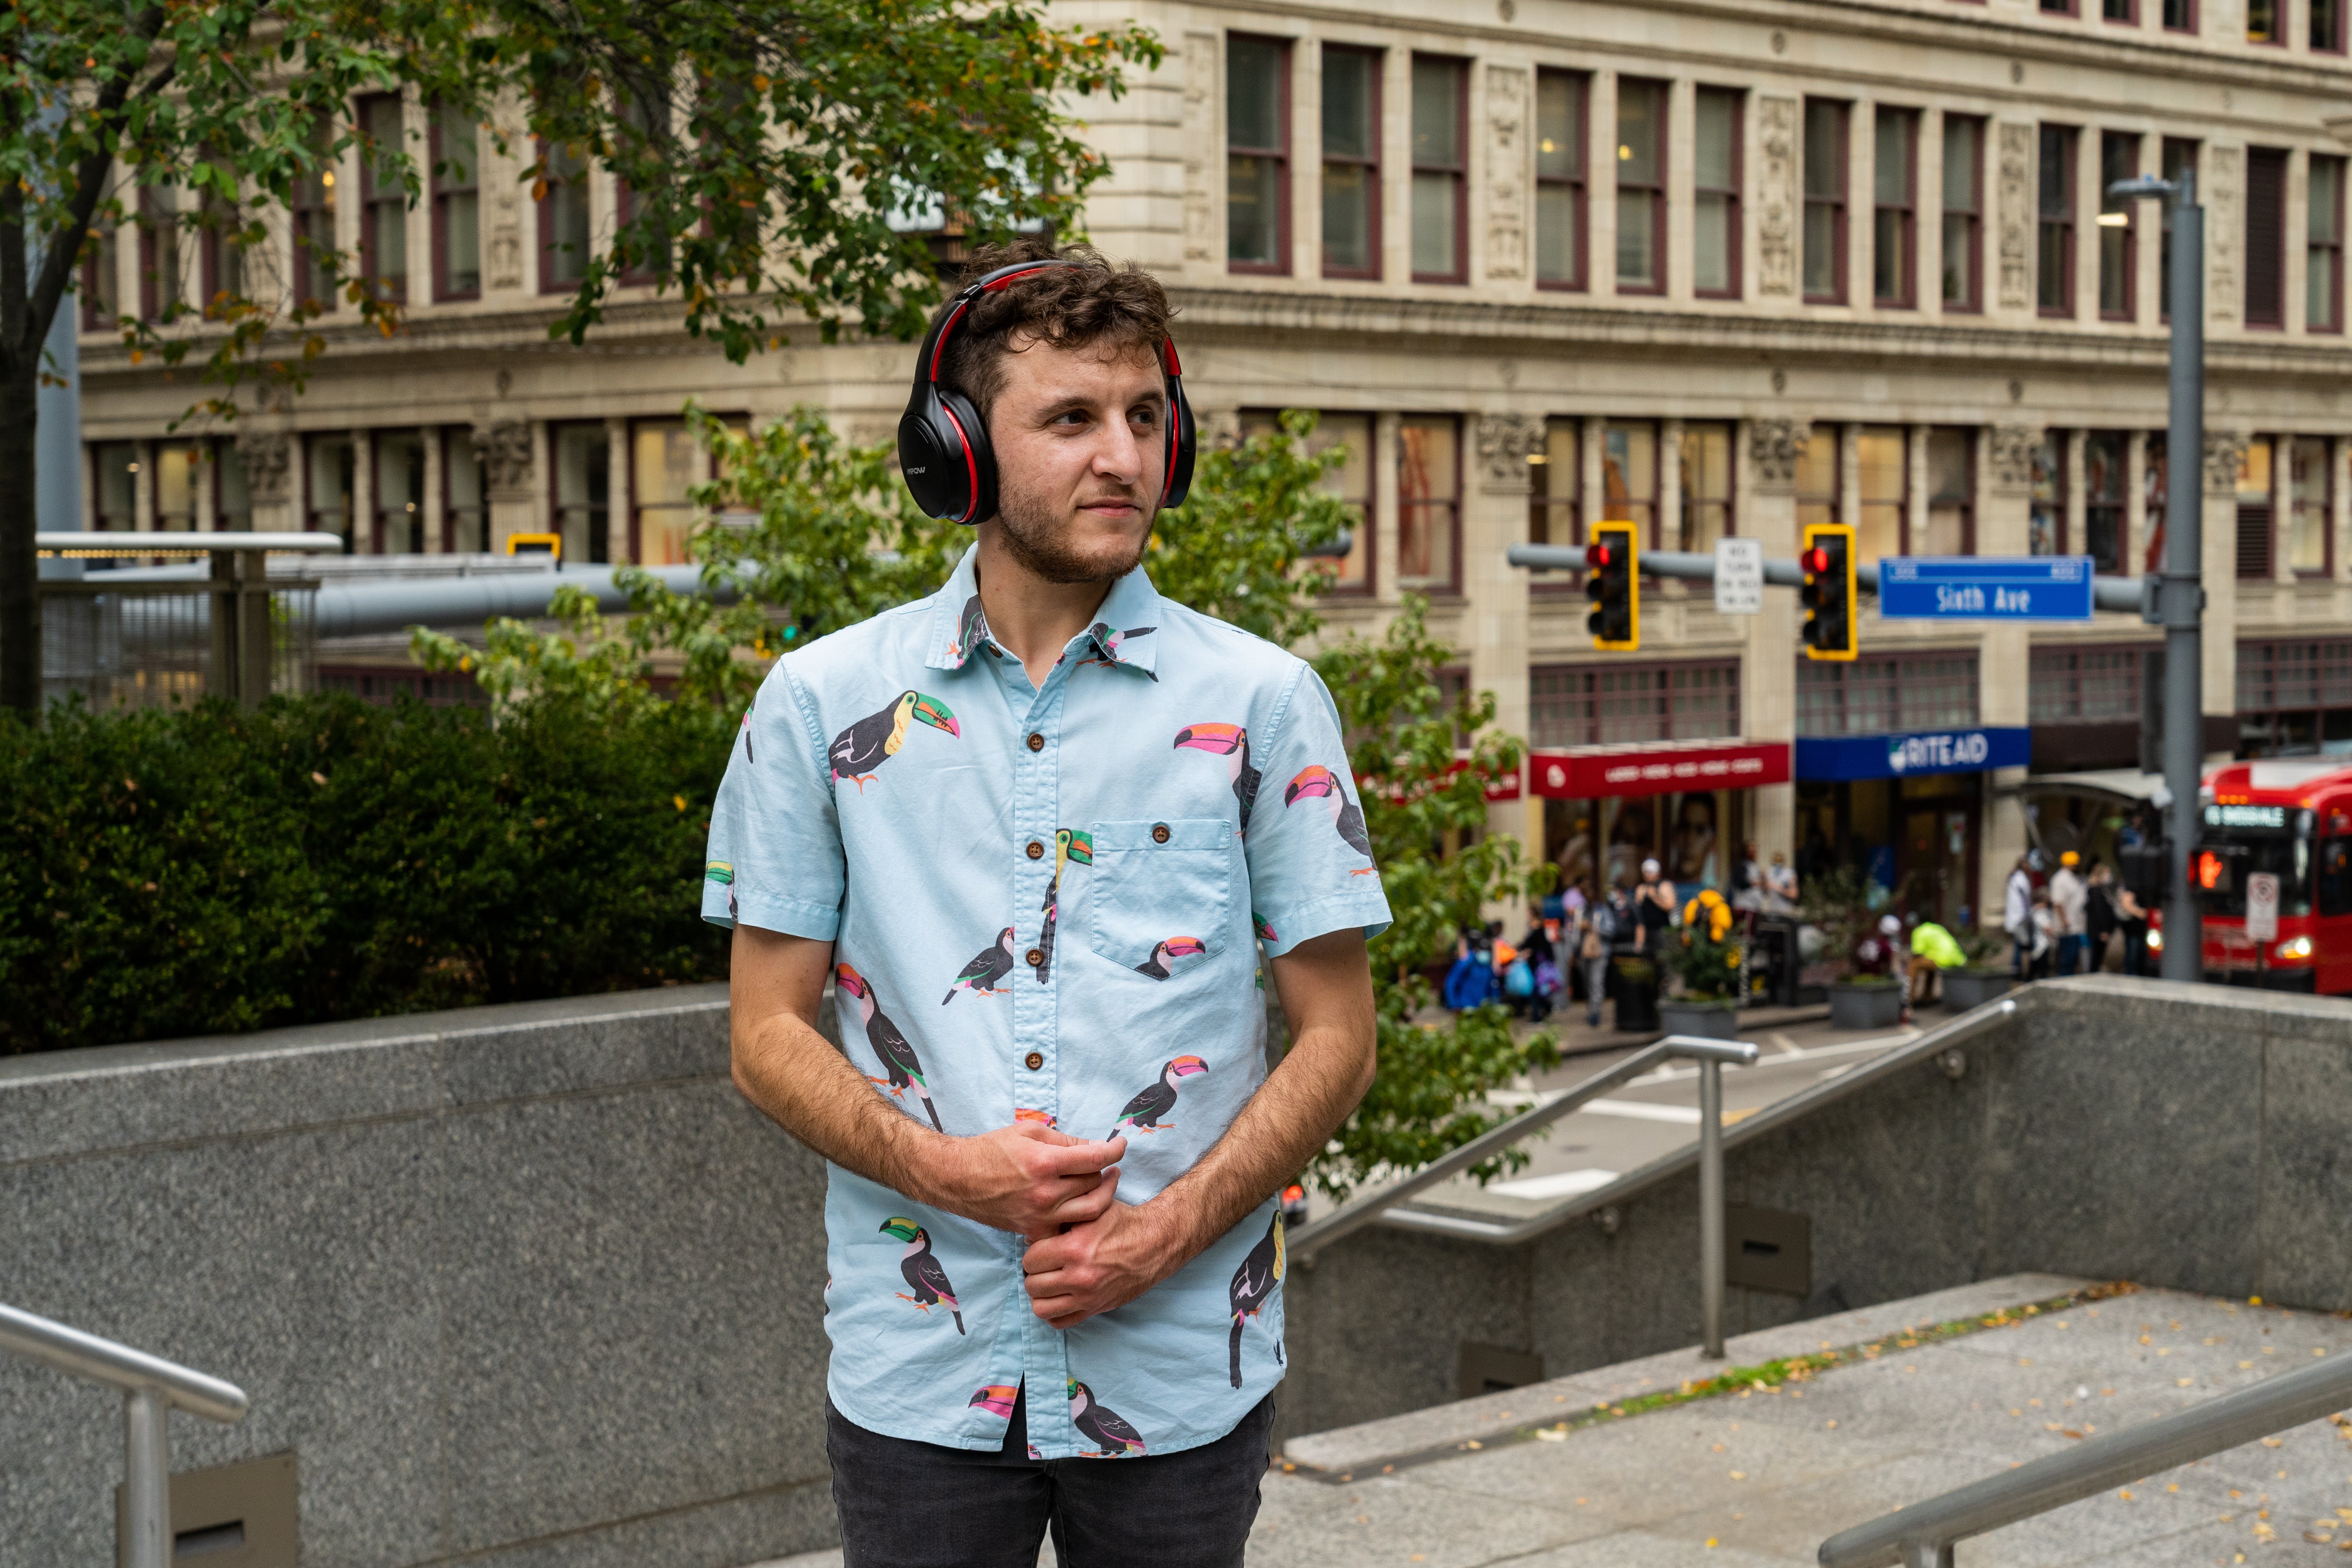 Eli Kurs-Lasky is a white man with curly dark brown hair standing outdoors in a treed plaza with headphones on